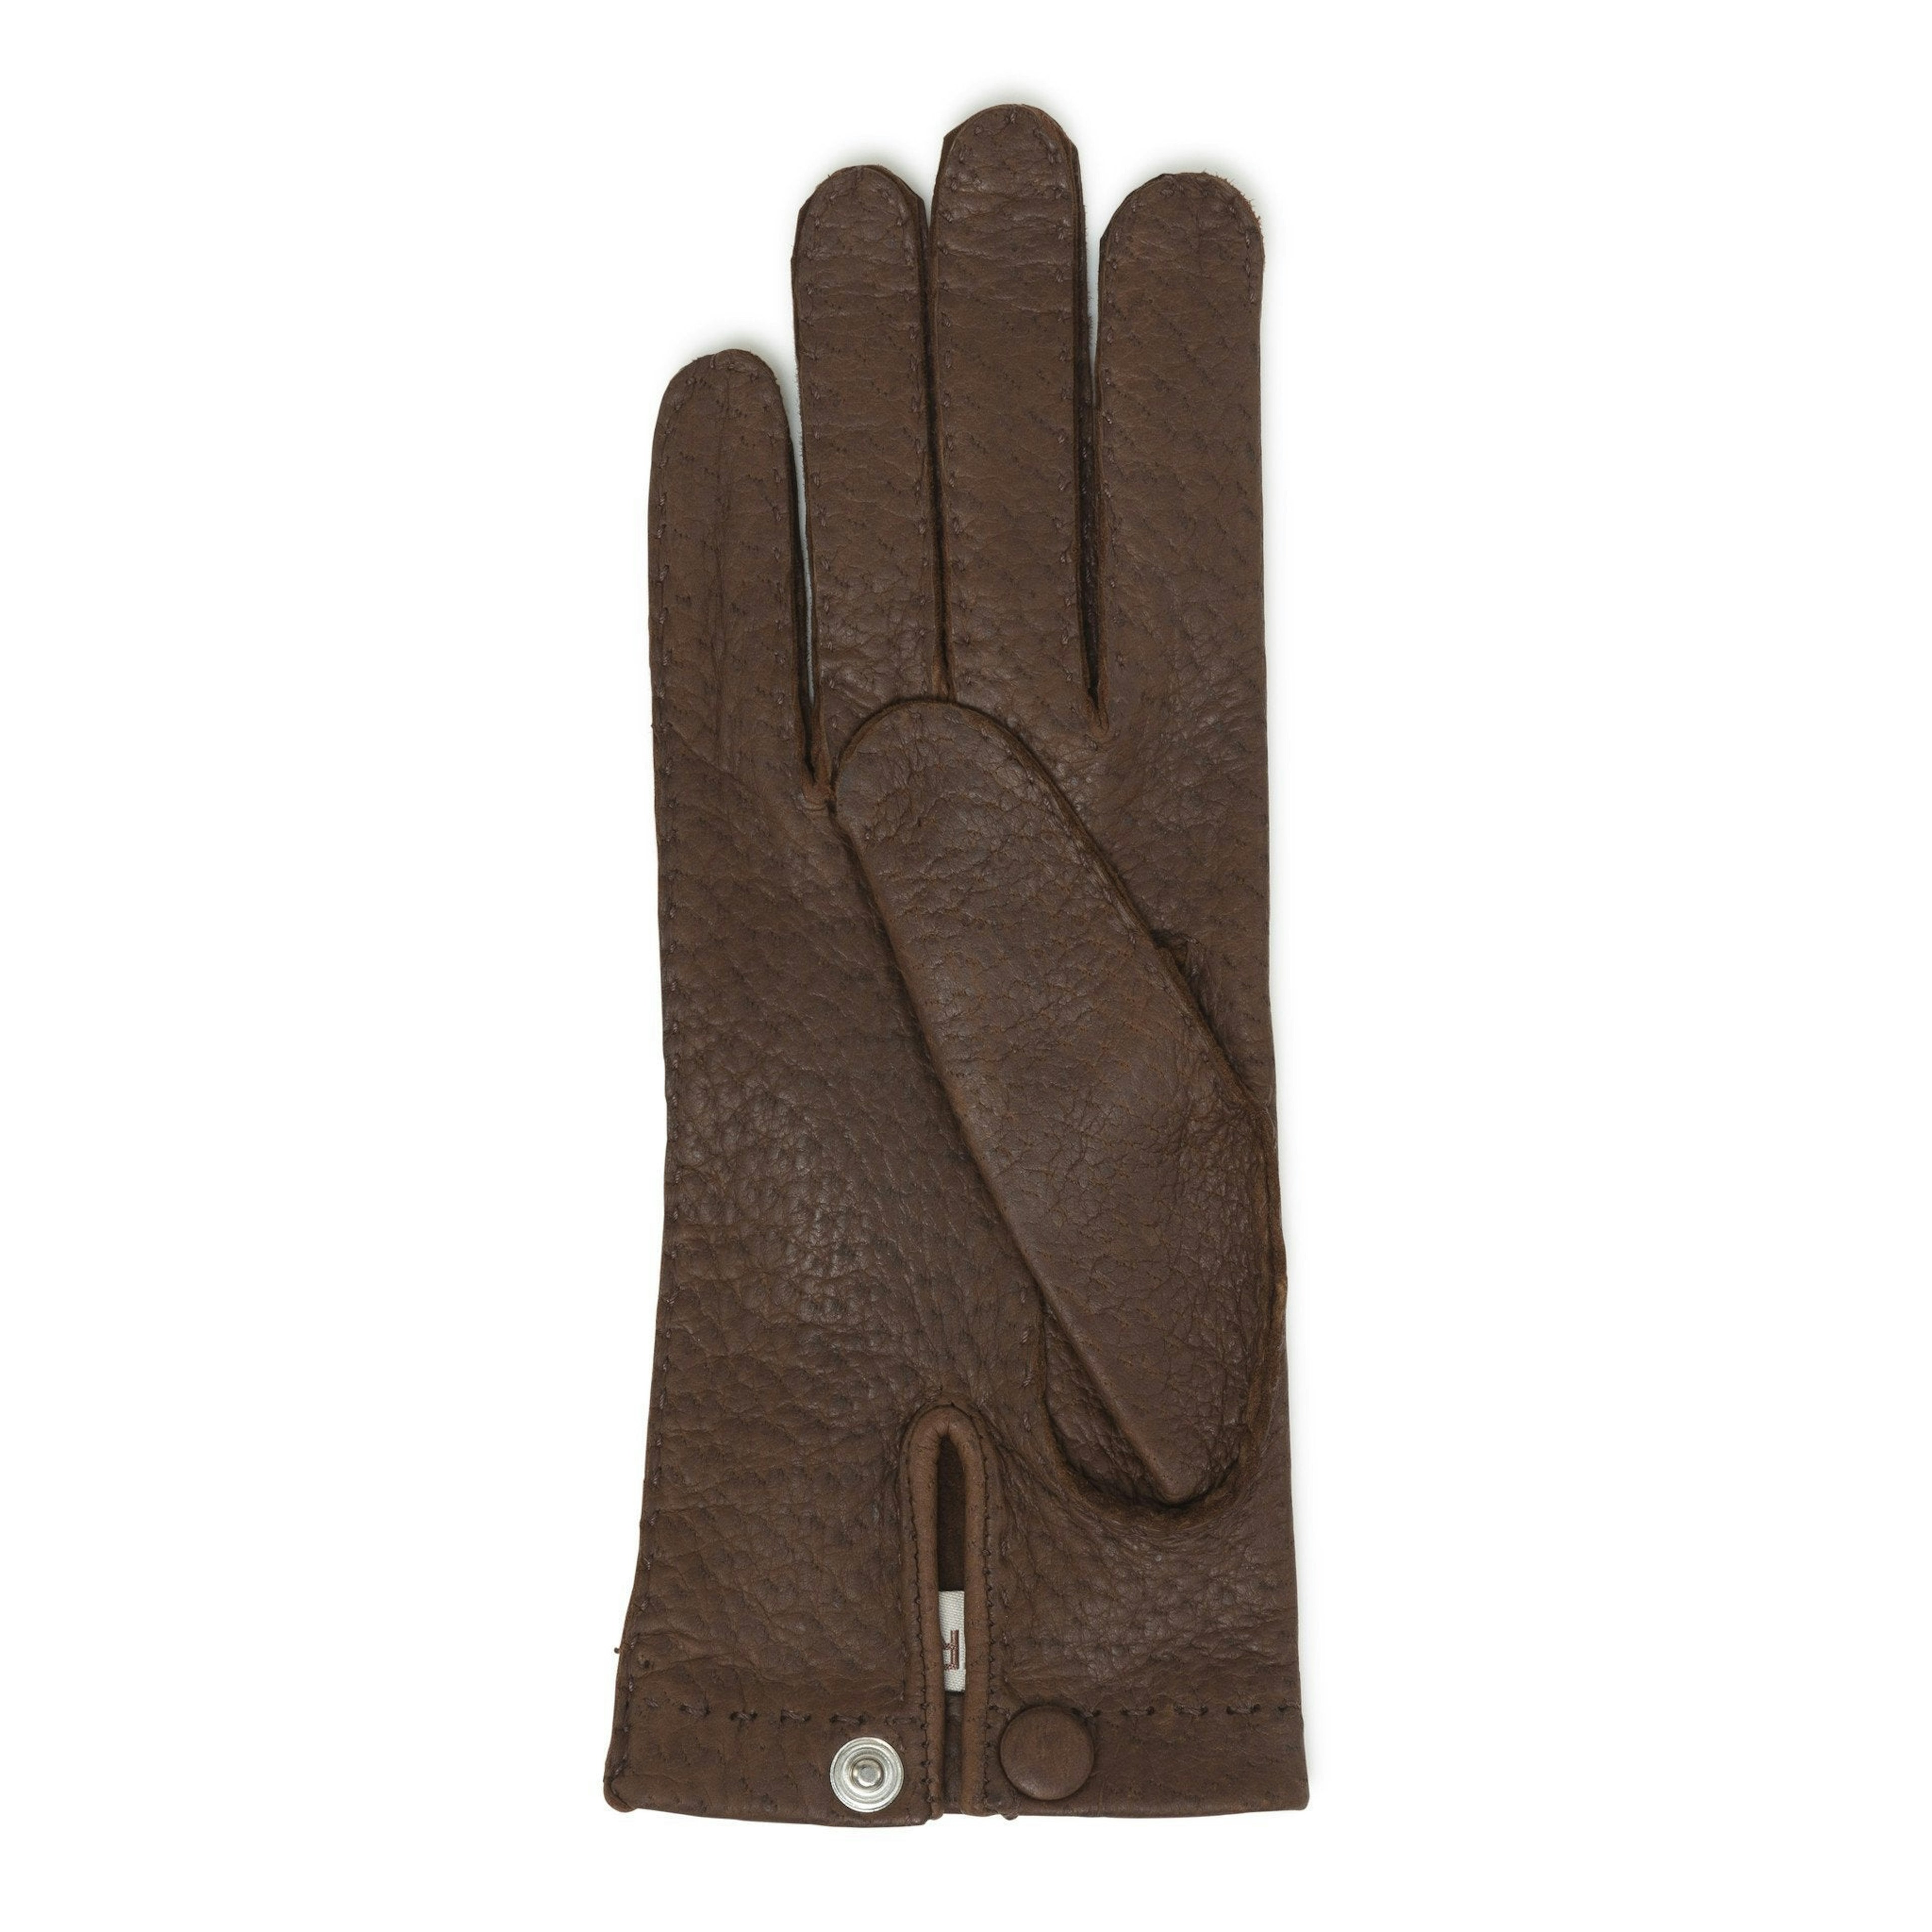 Fremhævet udbytte udslettelse Peccary Handsewn Unlined Palm Button Gloves - The Armoury